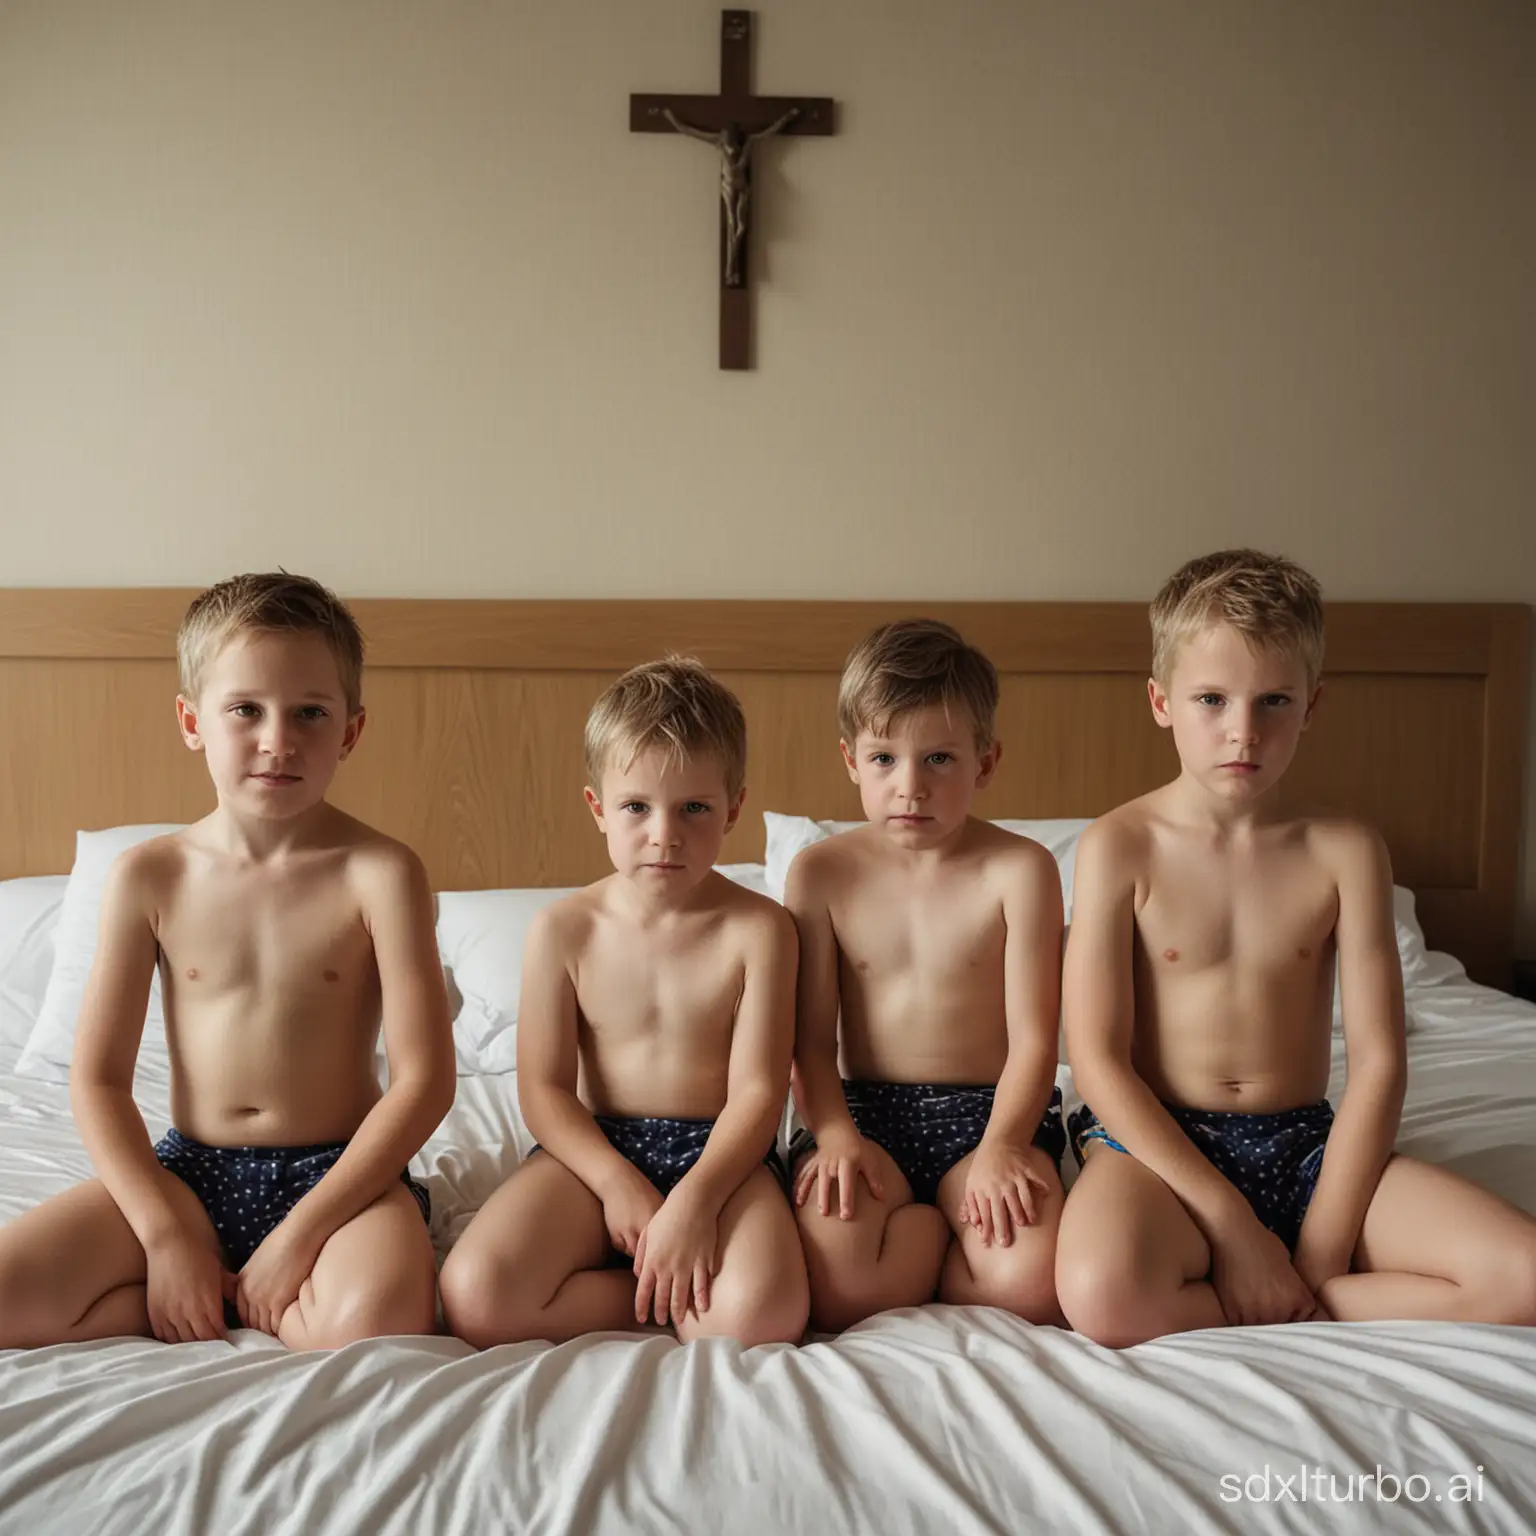 3 six-year-old boys in swimsuits sitting with 2 priests on a hotel bed. Gloomy light